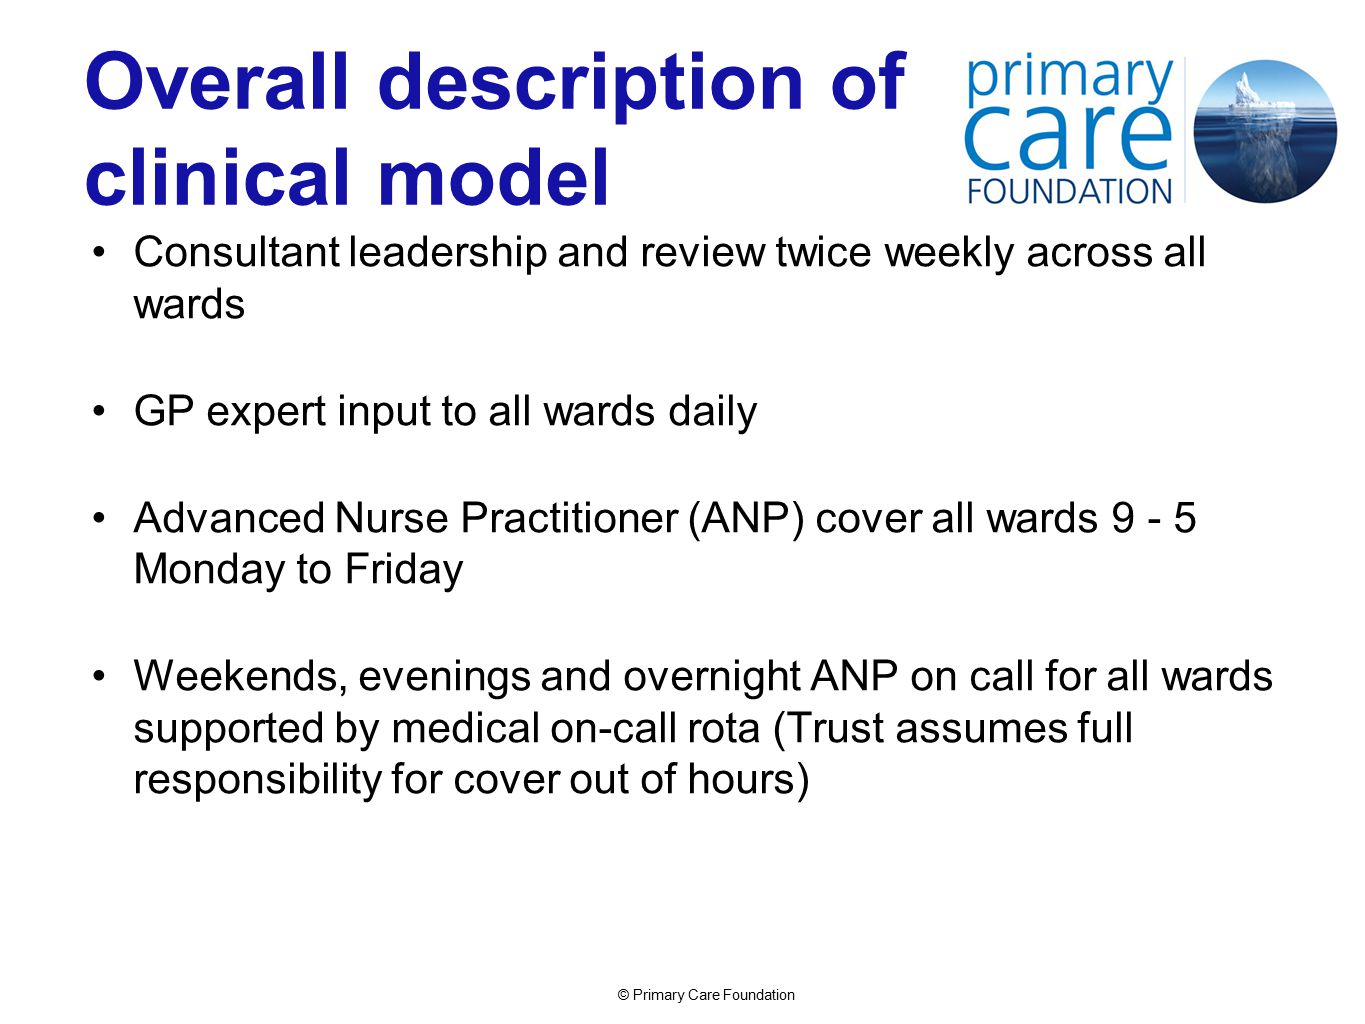 © Primary Care Foundation Overall description of clinical model Consultant leadership and review twice weekly across all wards GP expert input to all wards daily Advanced Nurse Practitioner (ANP) cover all wards Monday to Friday Weekends, evenings and overnight ANP on call for all wards supported by medical on-call rota (Trust assumes full responsibility for cover out of hours)